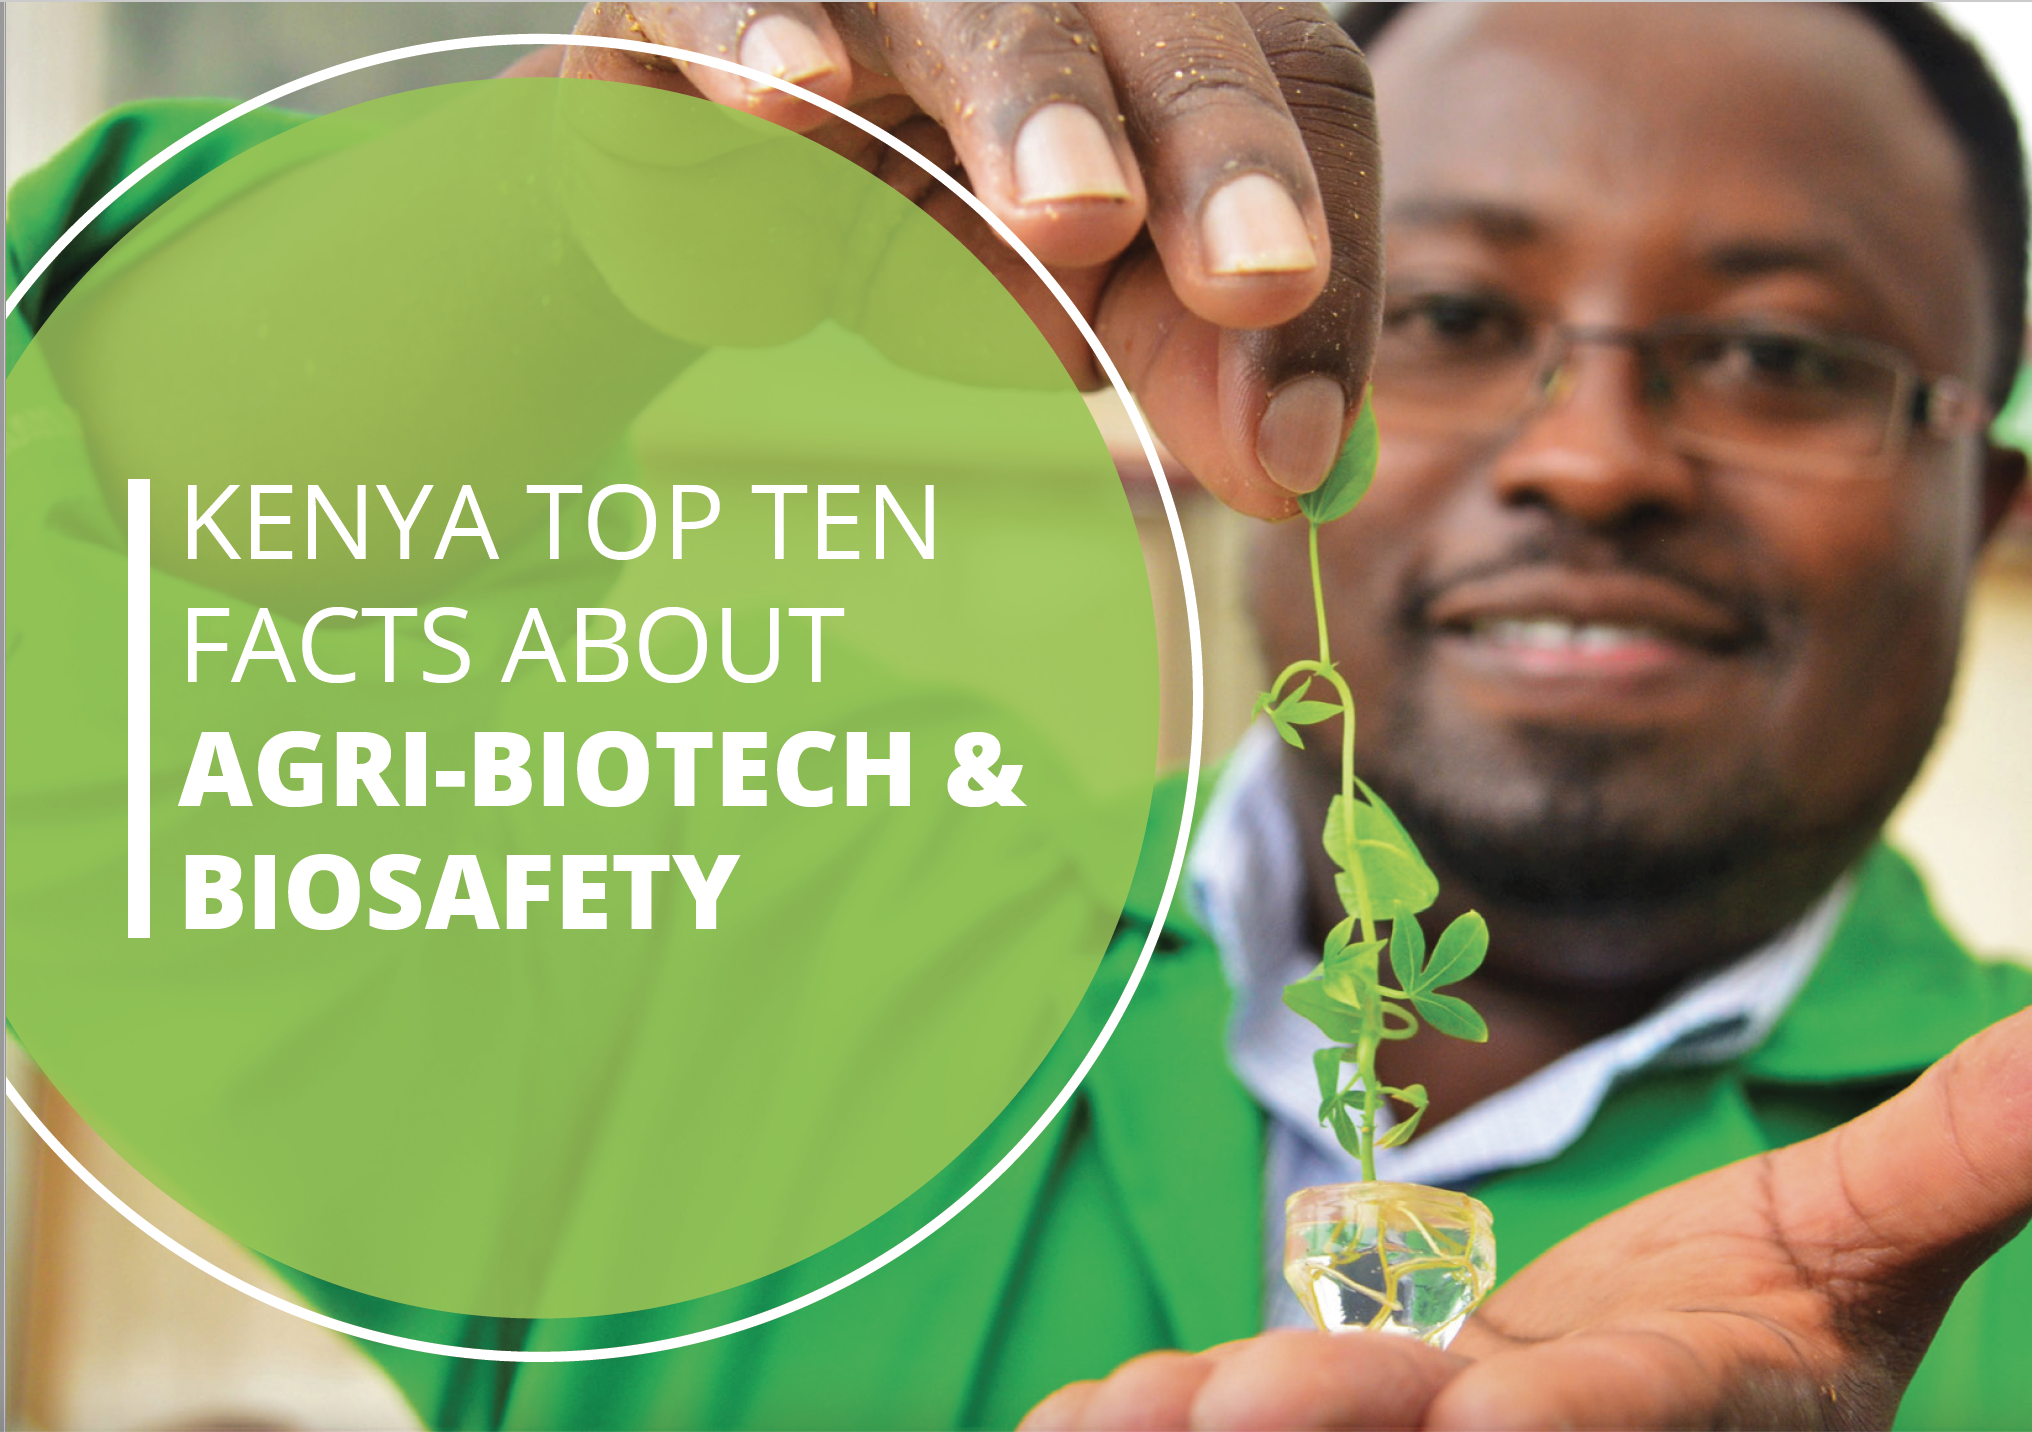 Kenya Top Ten Facts about Agri-Biotech and Biosafety